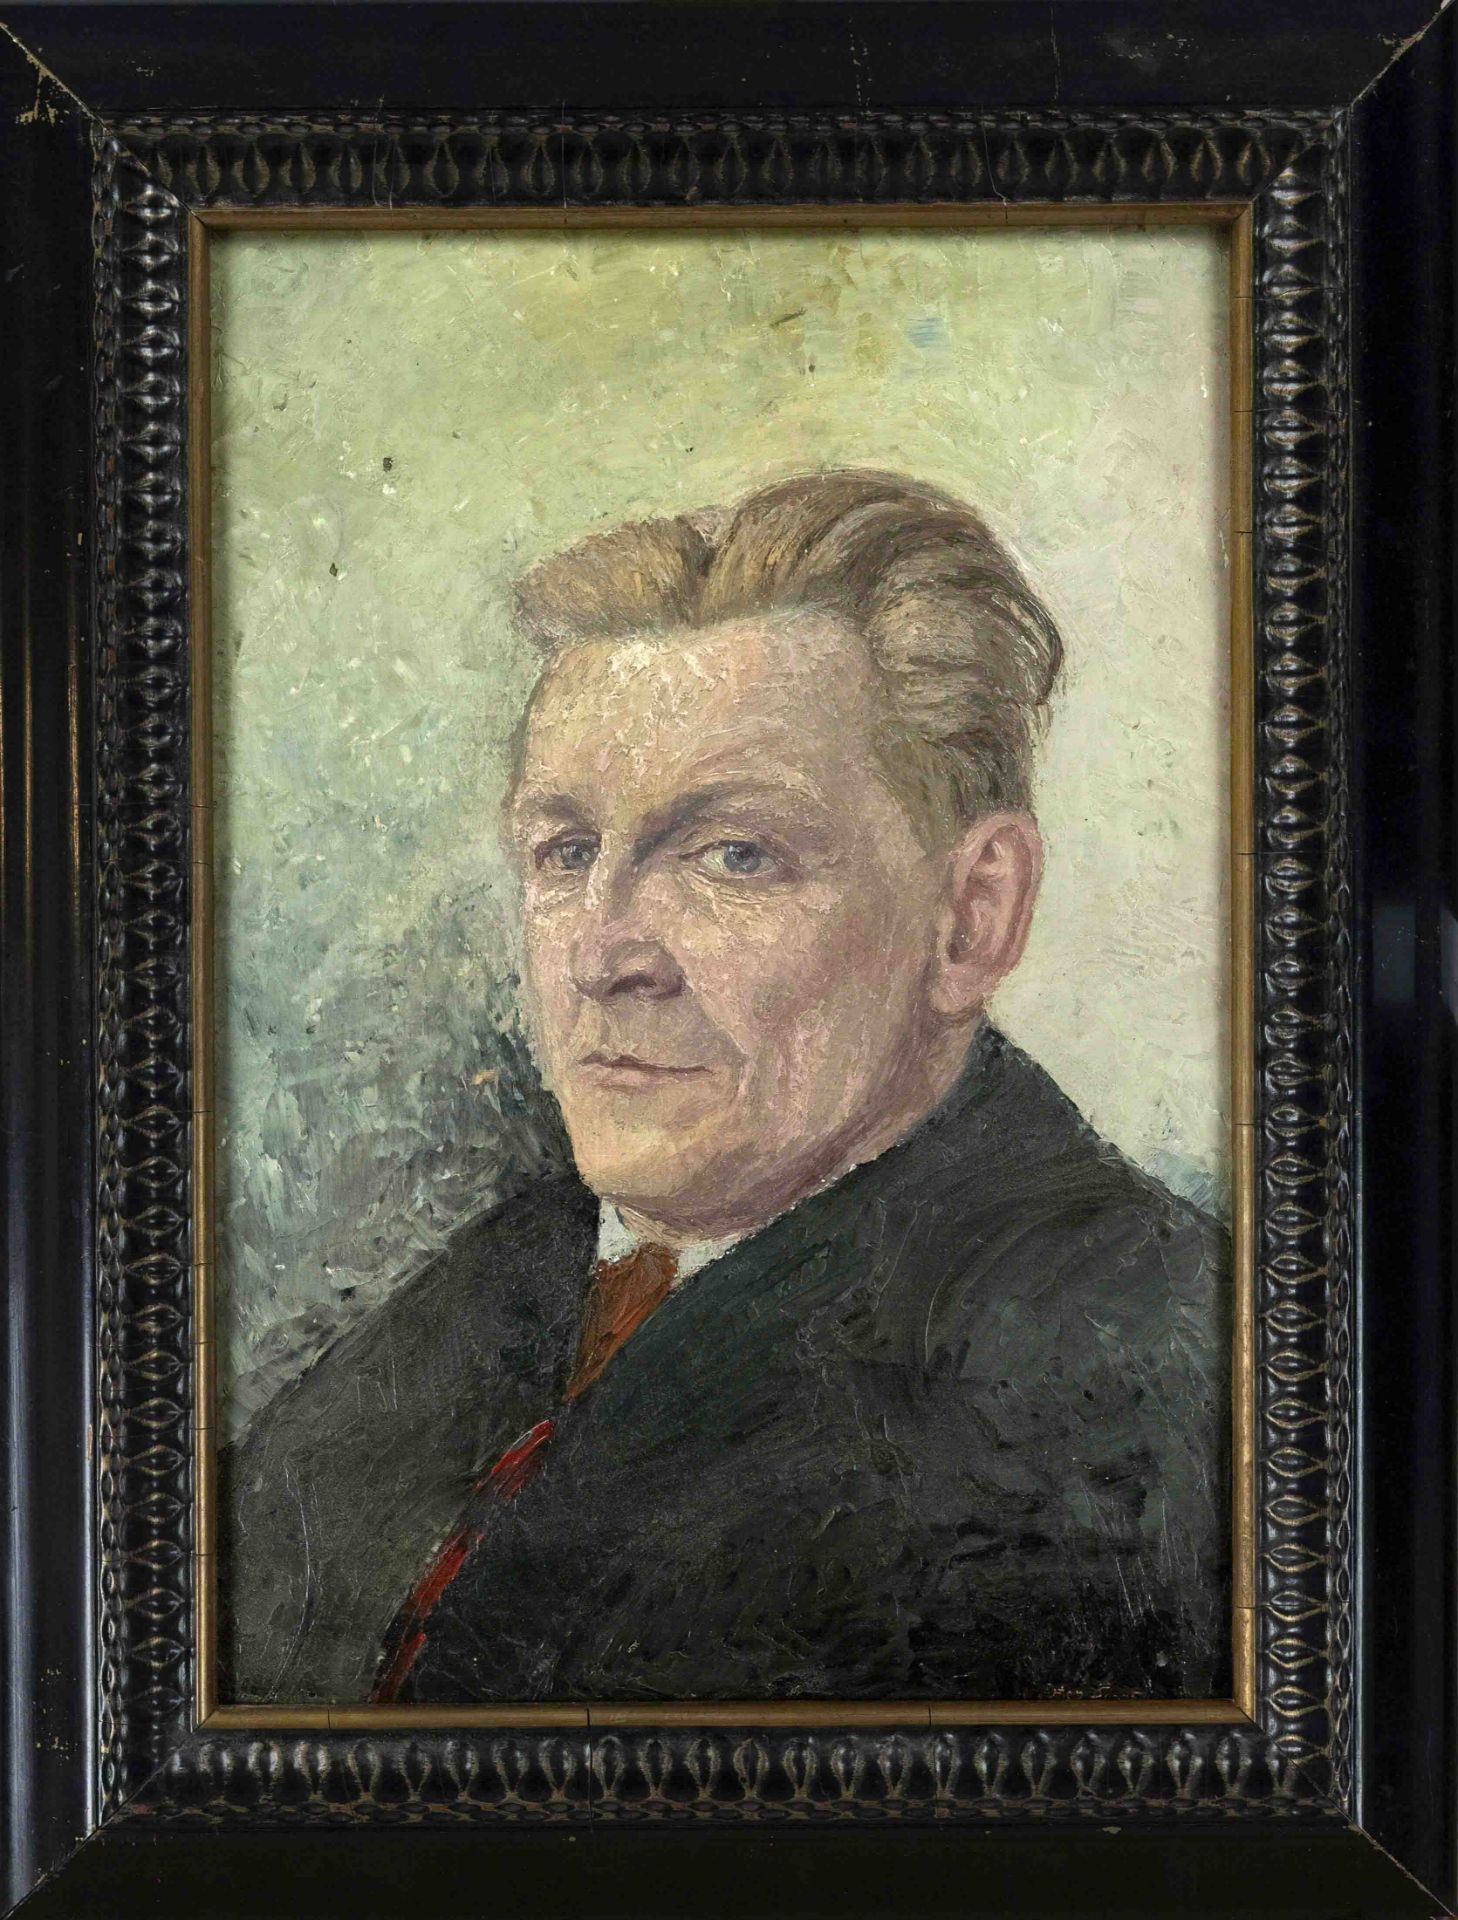 Anonymous portrait painter 1st half of the 20th century, Portrait of a man with a red tie, oil on